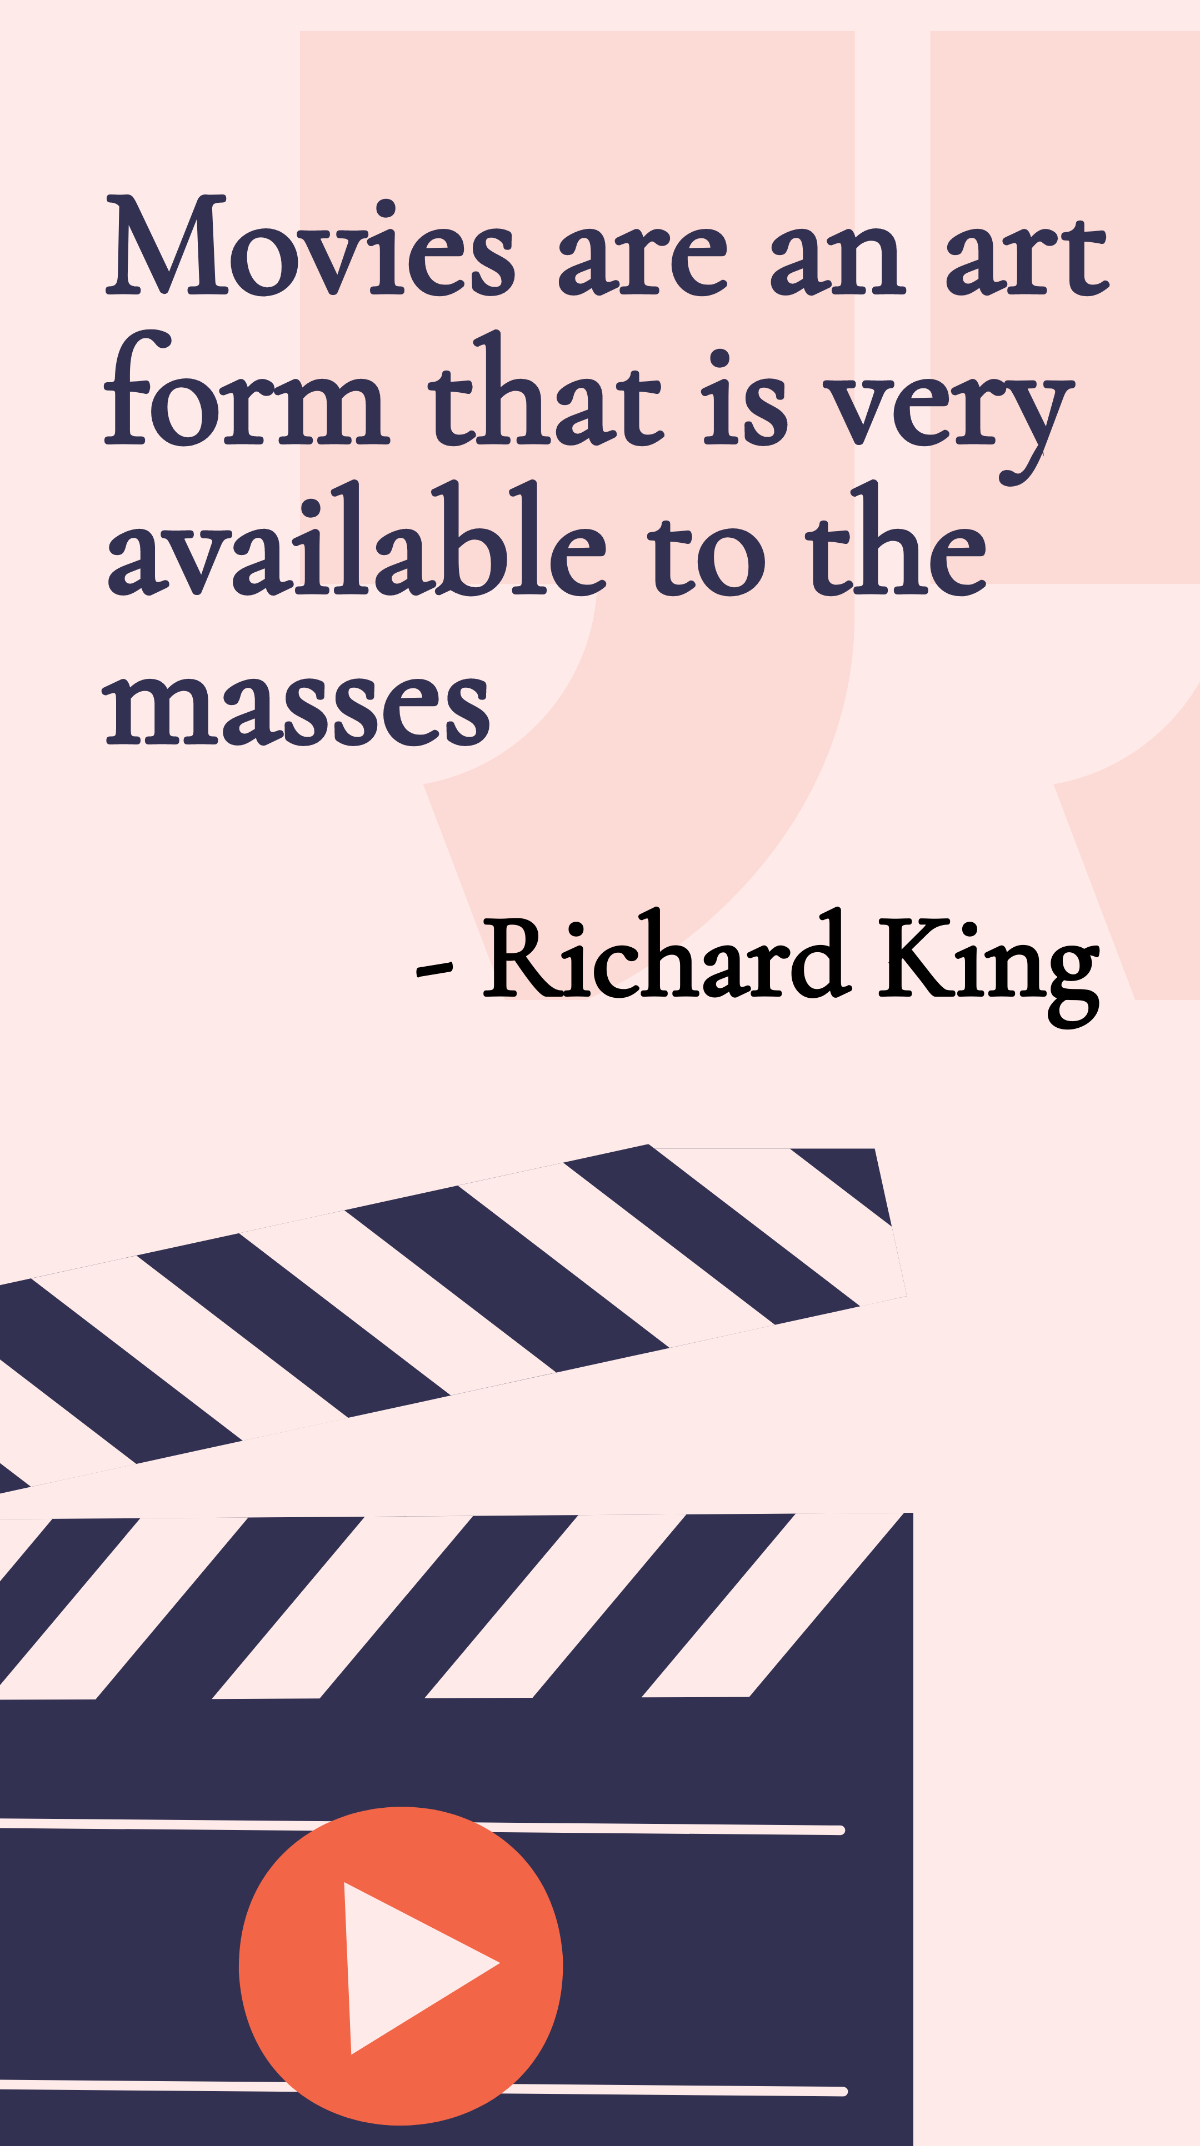 Richard King - Movies are an art form that is very available to the masses Template